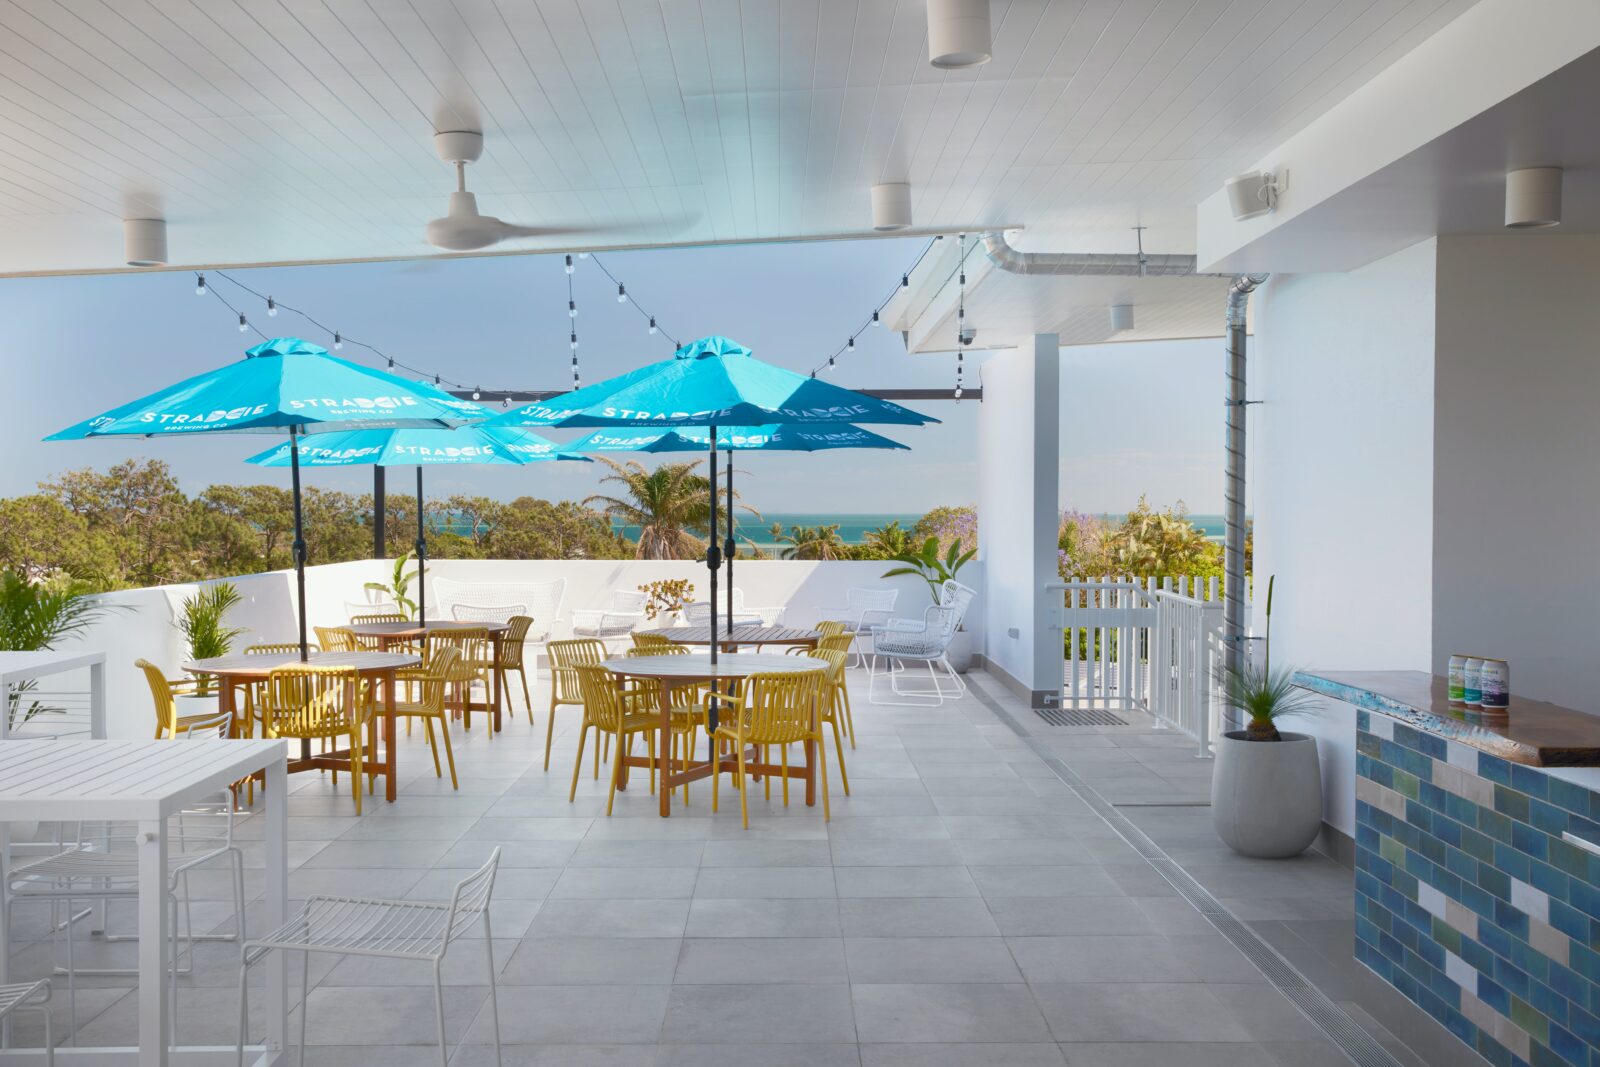 Rooftop Deck with low set tables covered with umbrellas, and views of the water and greenery